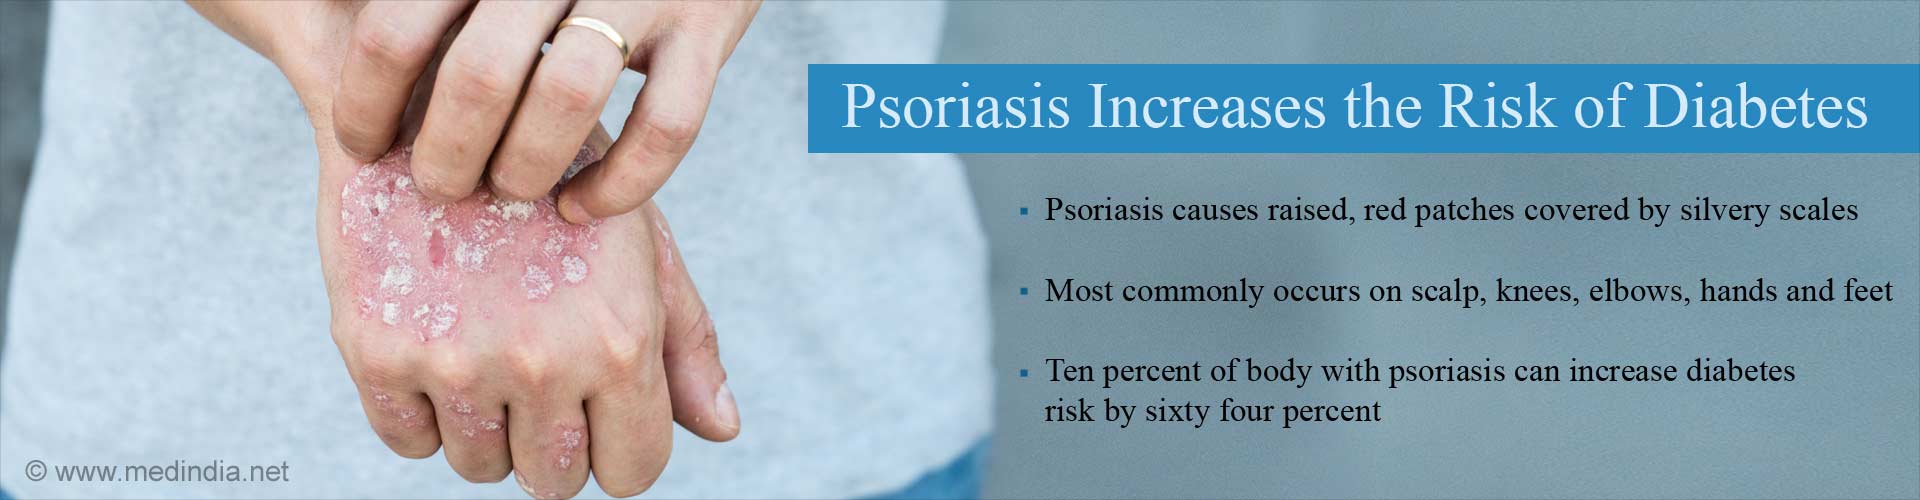 Psoriasis increases the risk of diabetes
- Psoriasis causes raised, red patched covered by silvery scales
- Most commonly occurs on scalp, knees elbows, hands and feet
- Ten percent of body with psoriasis can increase diabetes risk by sixty four percent
